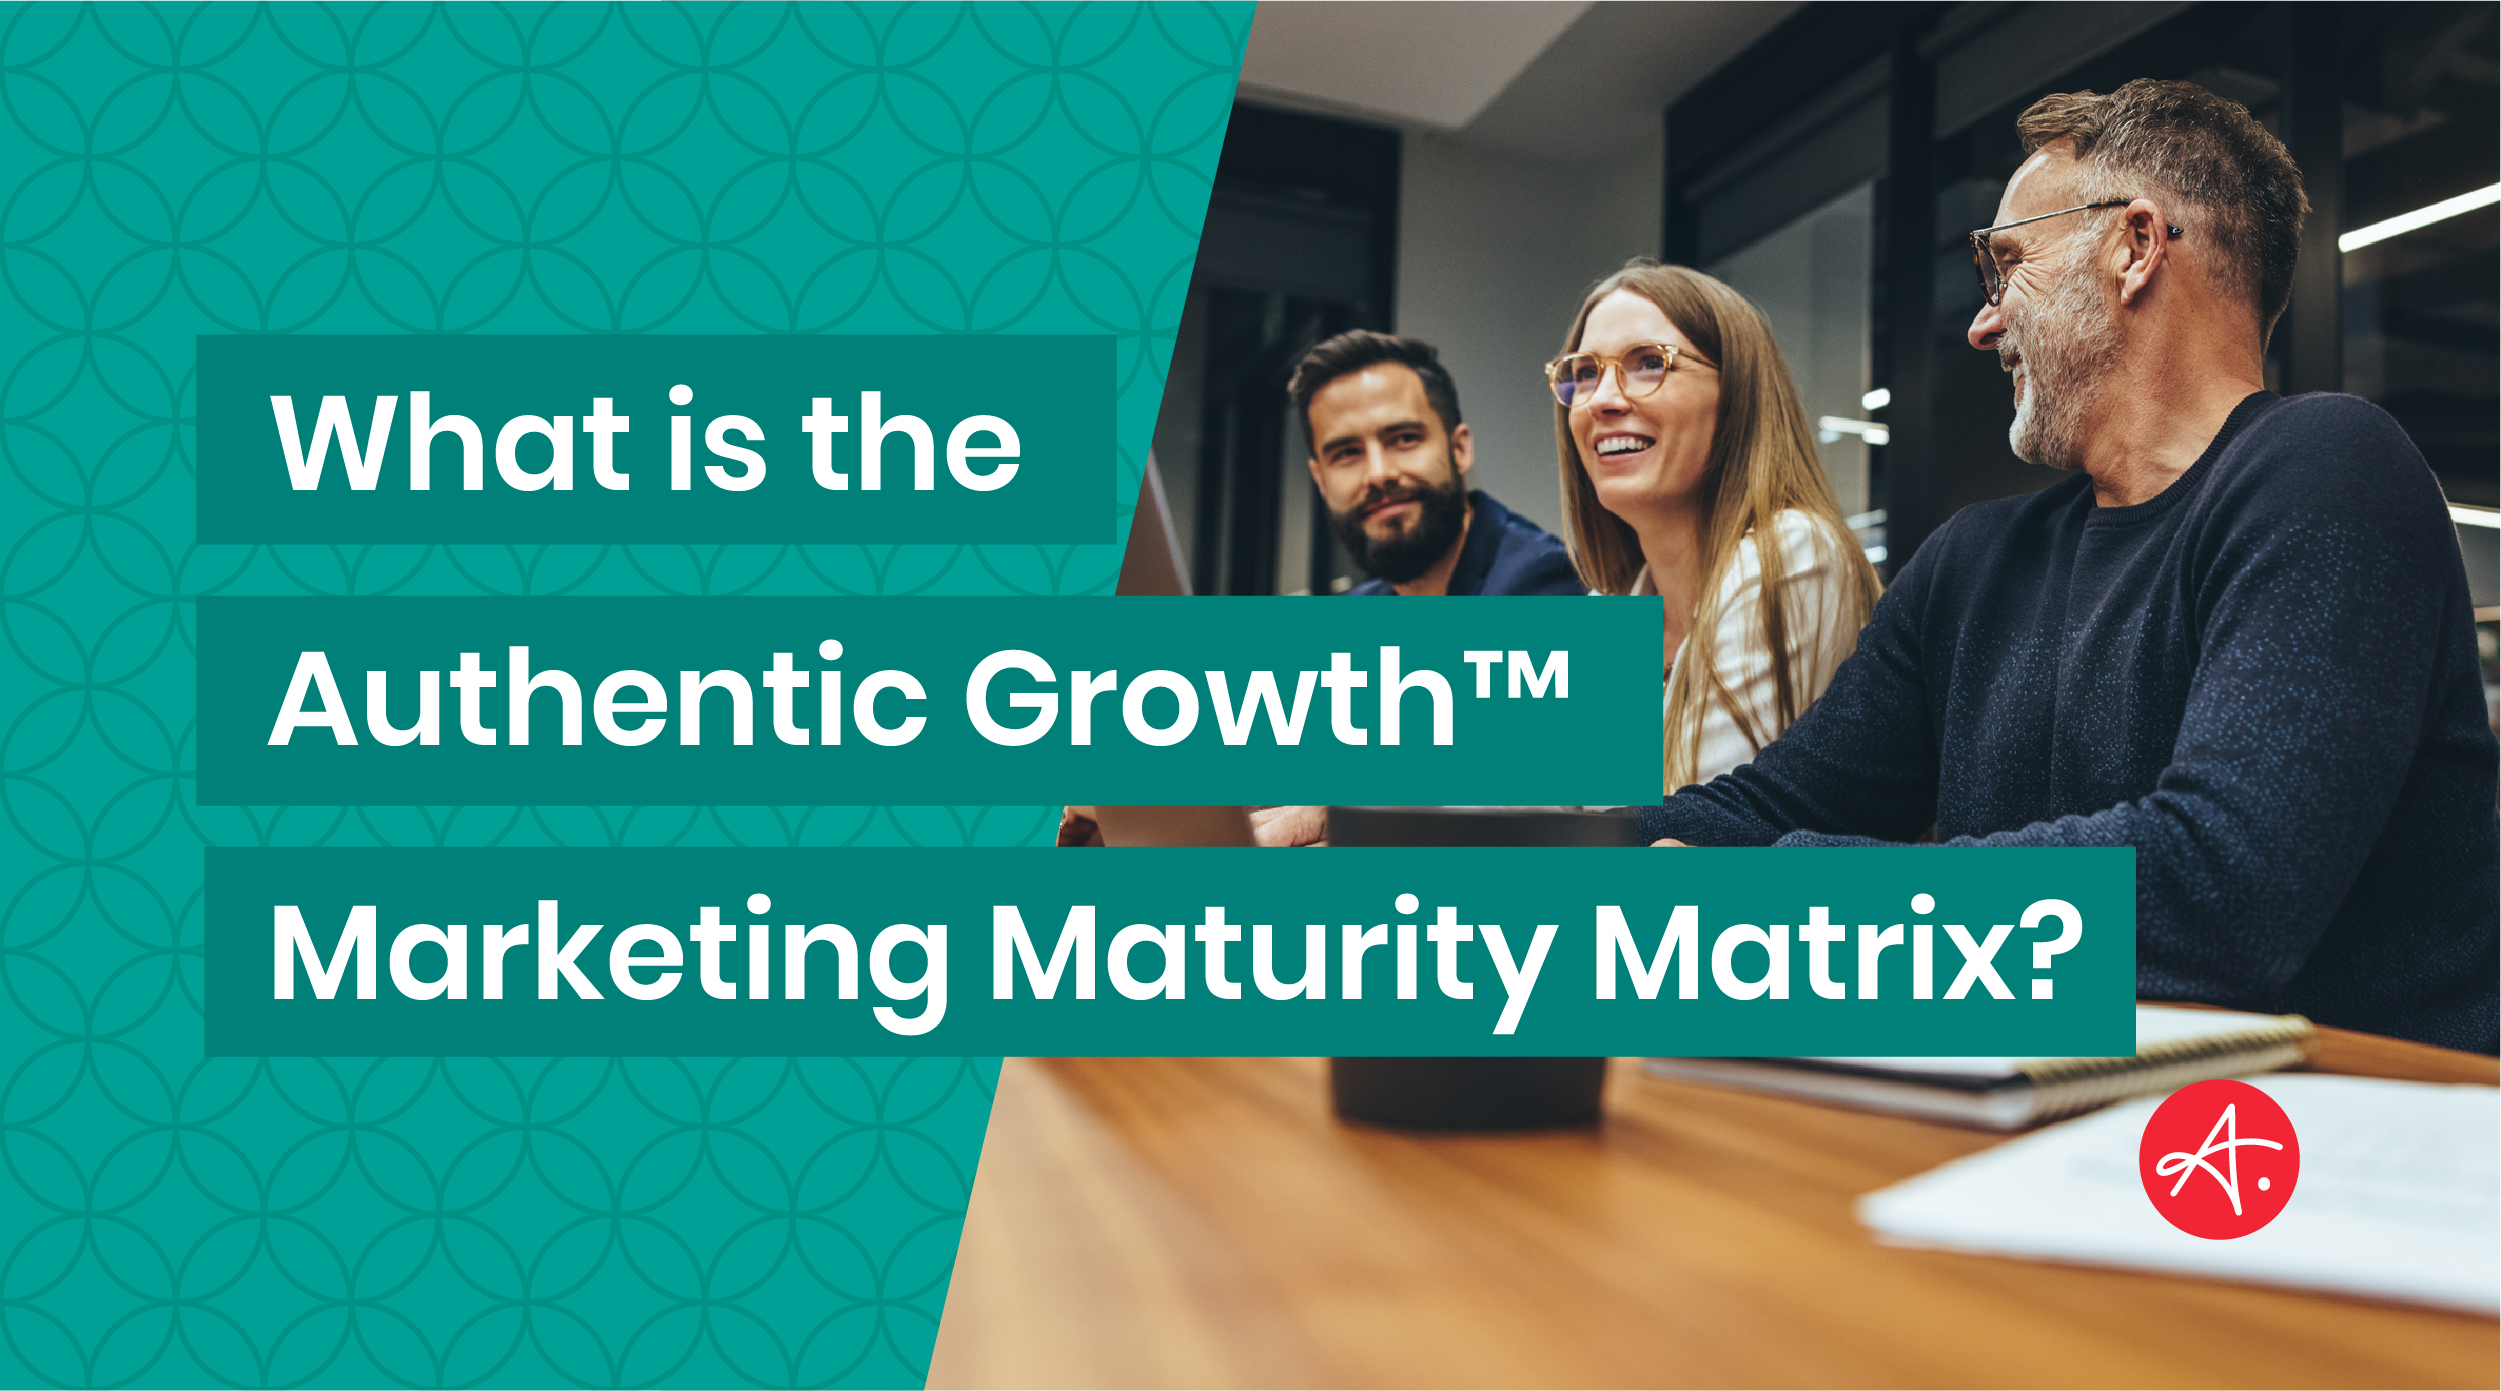 What is the Authentic Growth™ Marketing Maturity Matrix?